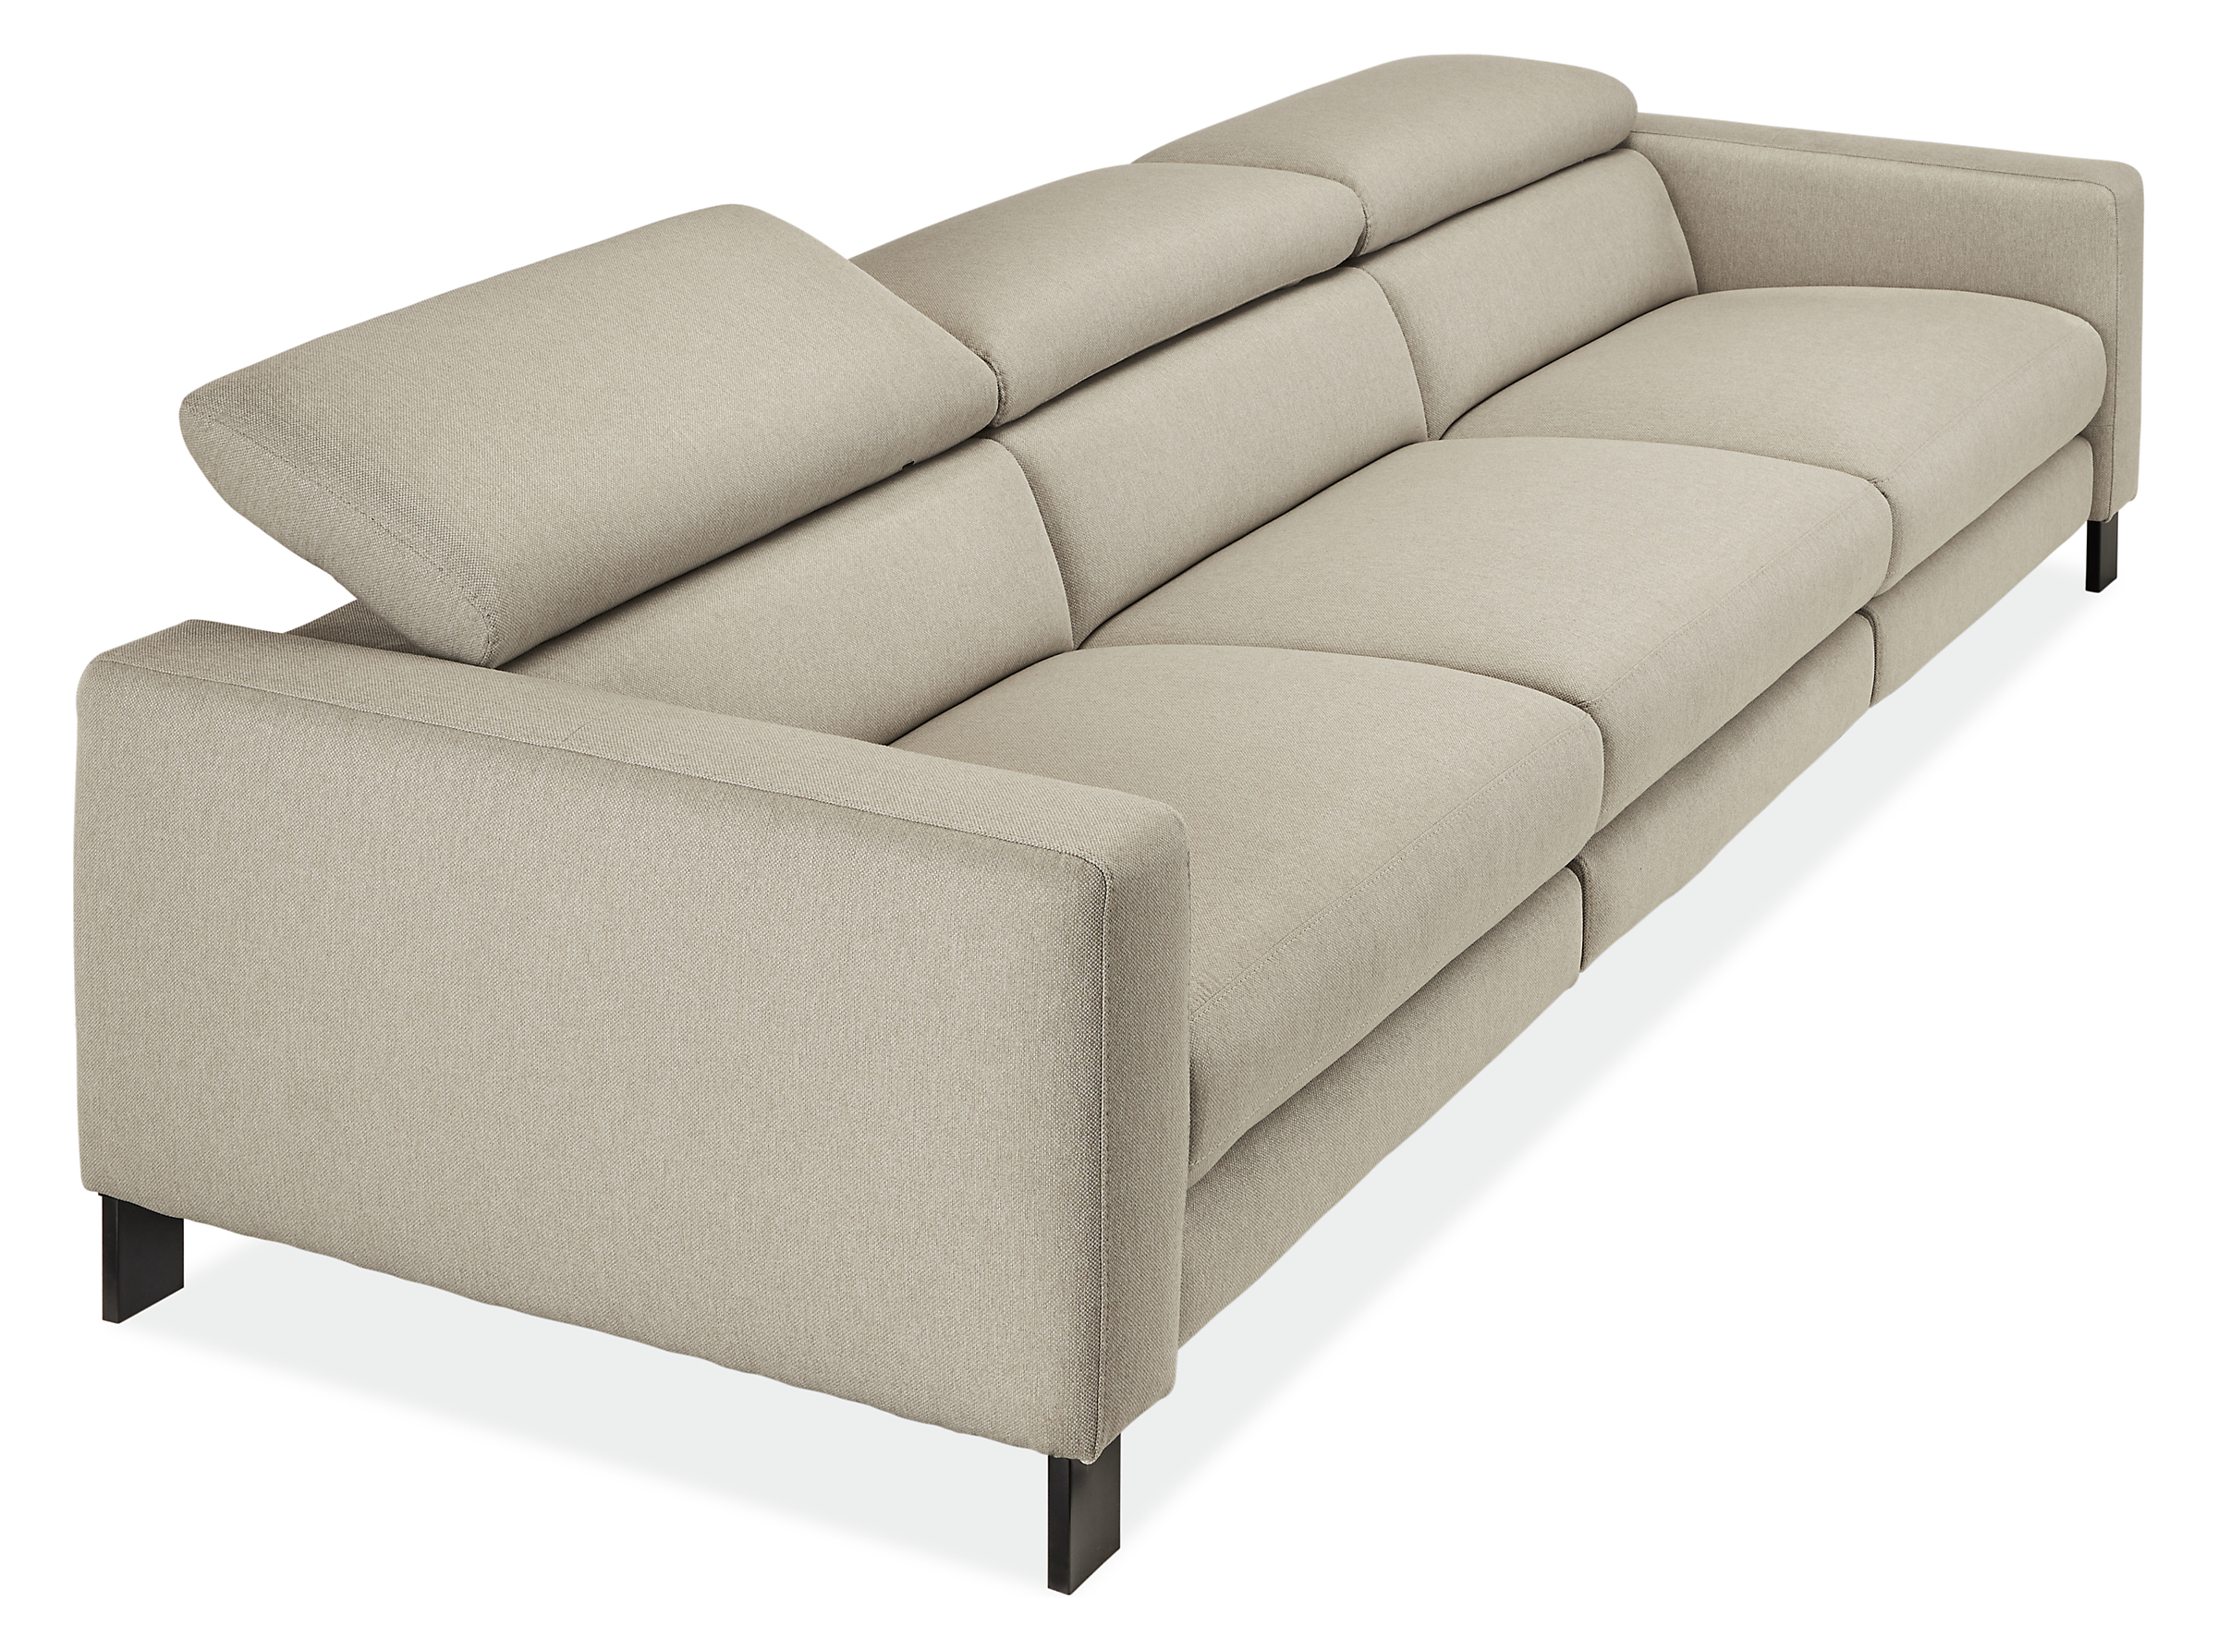 detail of gray Elio sofa with 1 headrest partially extended.